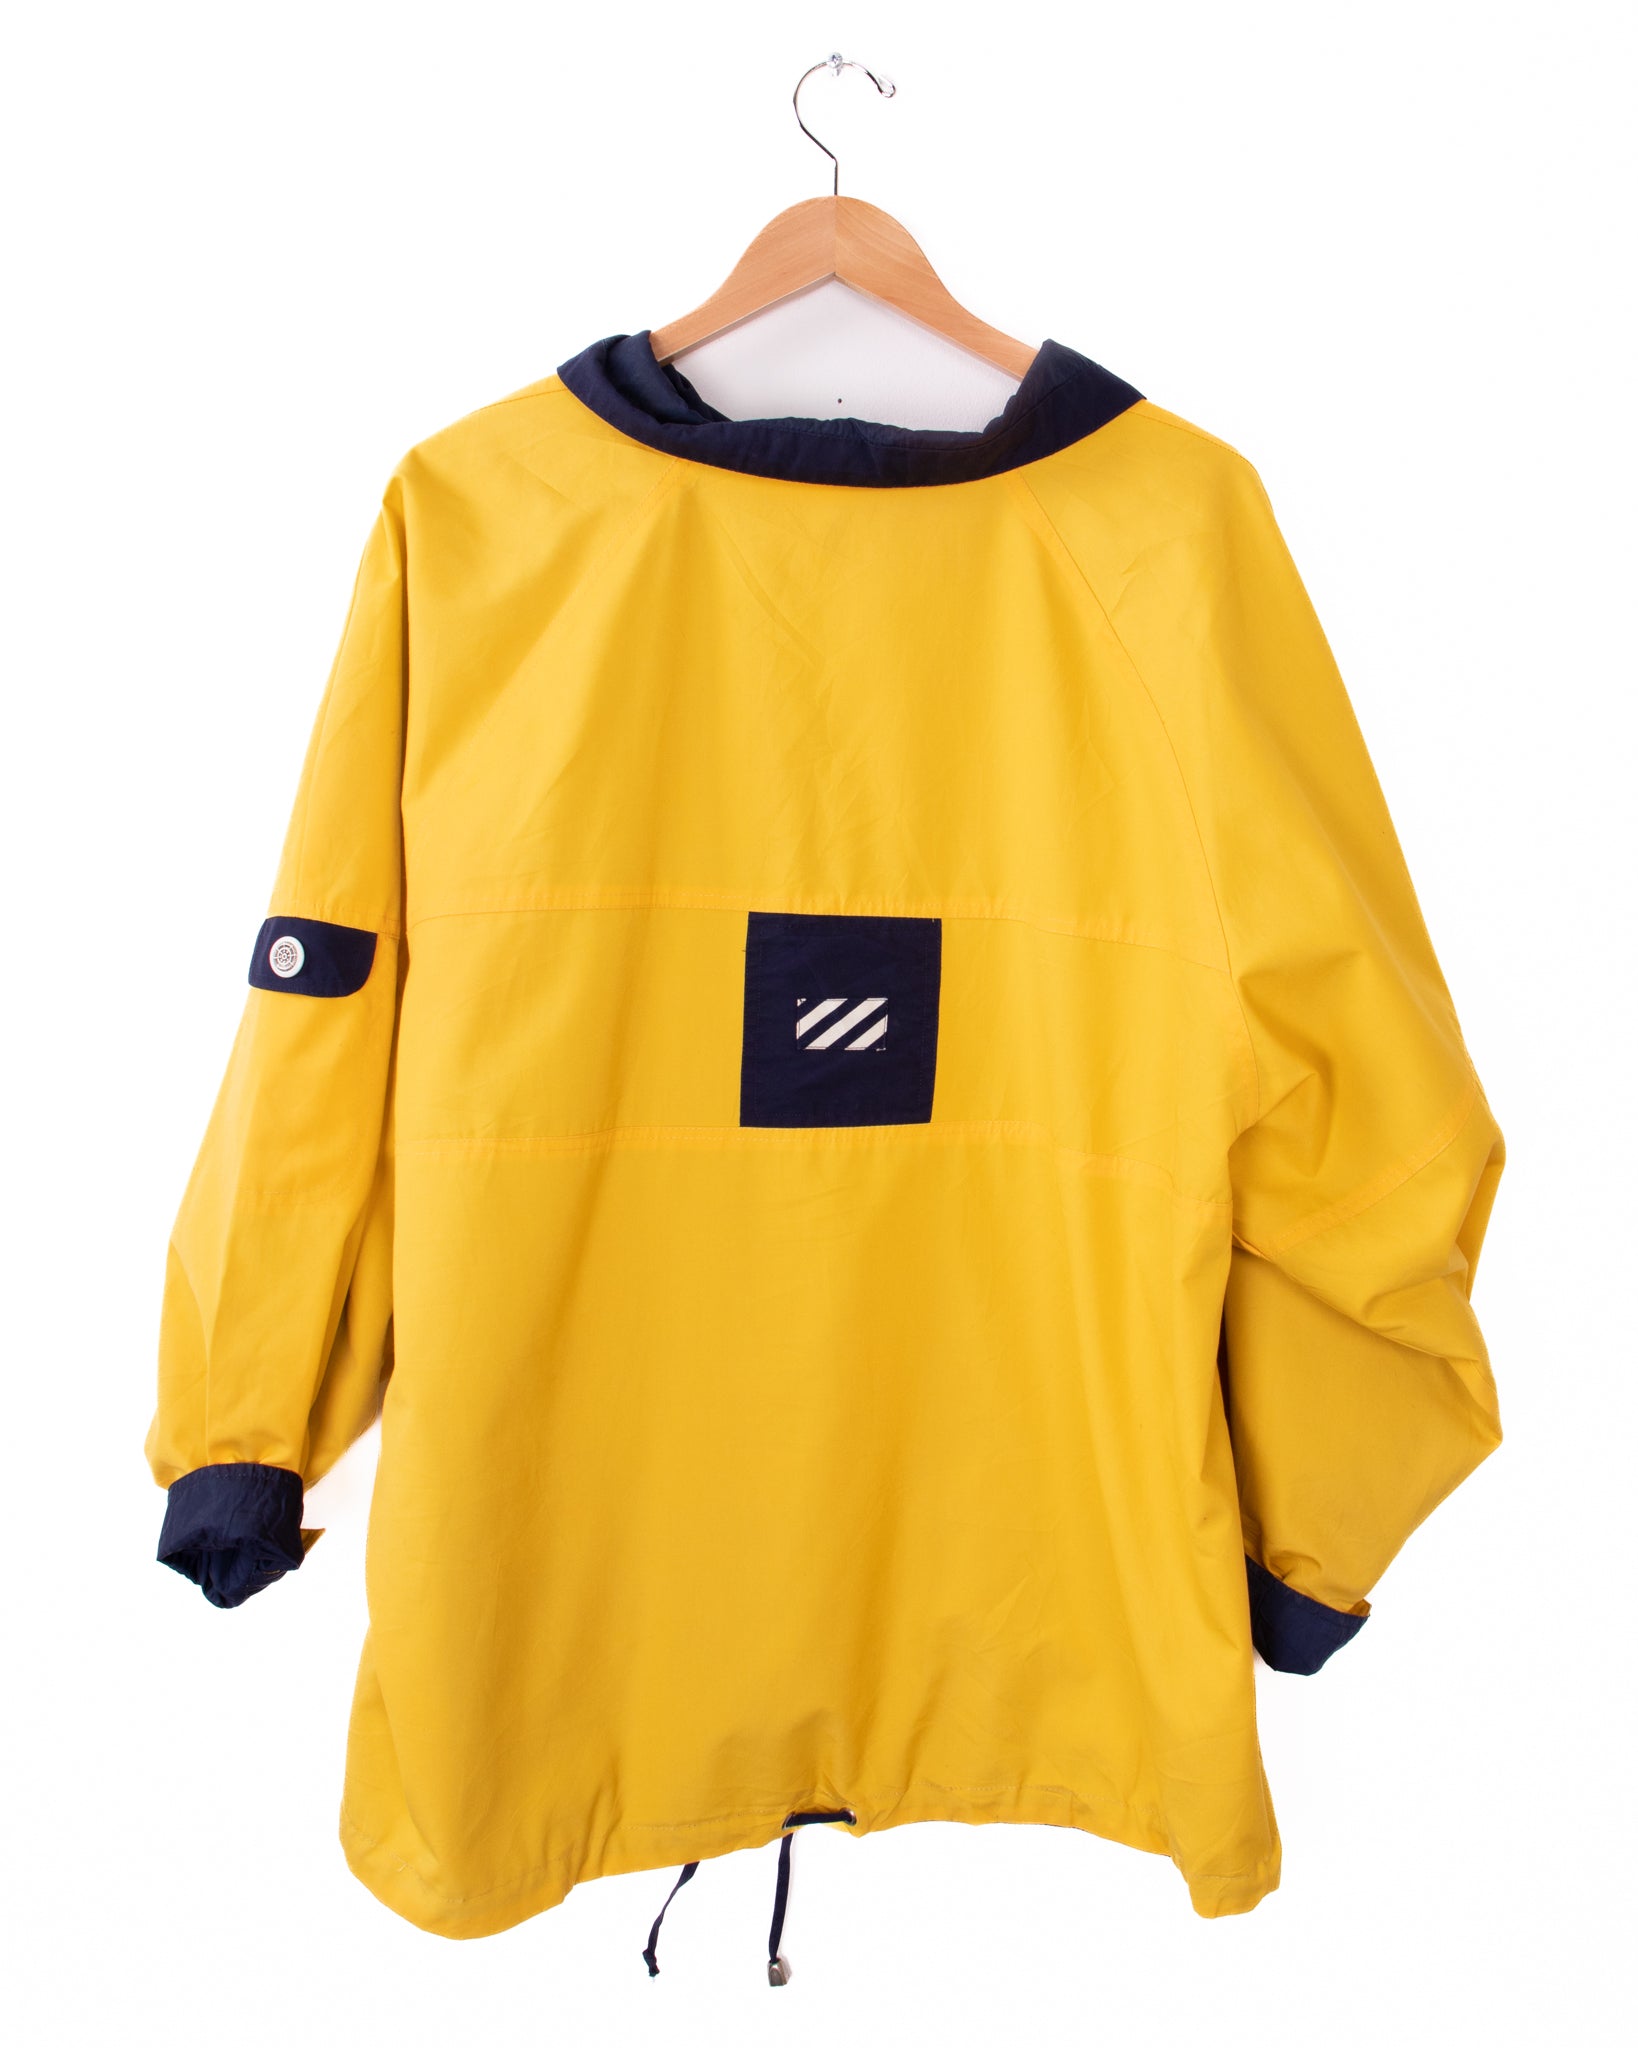 Reversible Navy Blue and Yellow Jacket